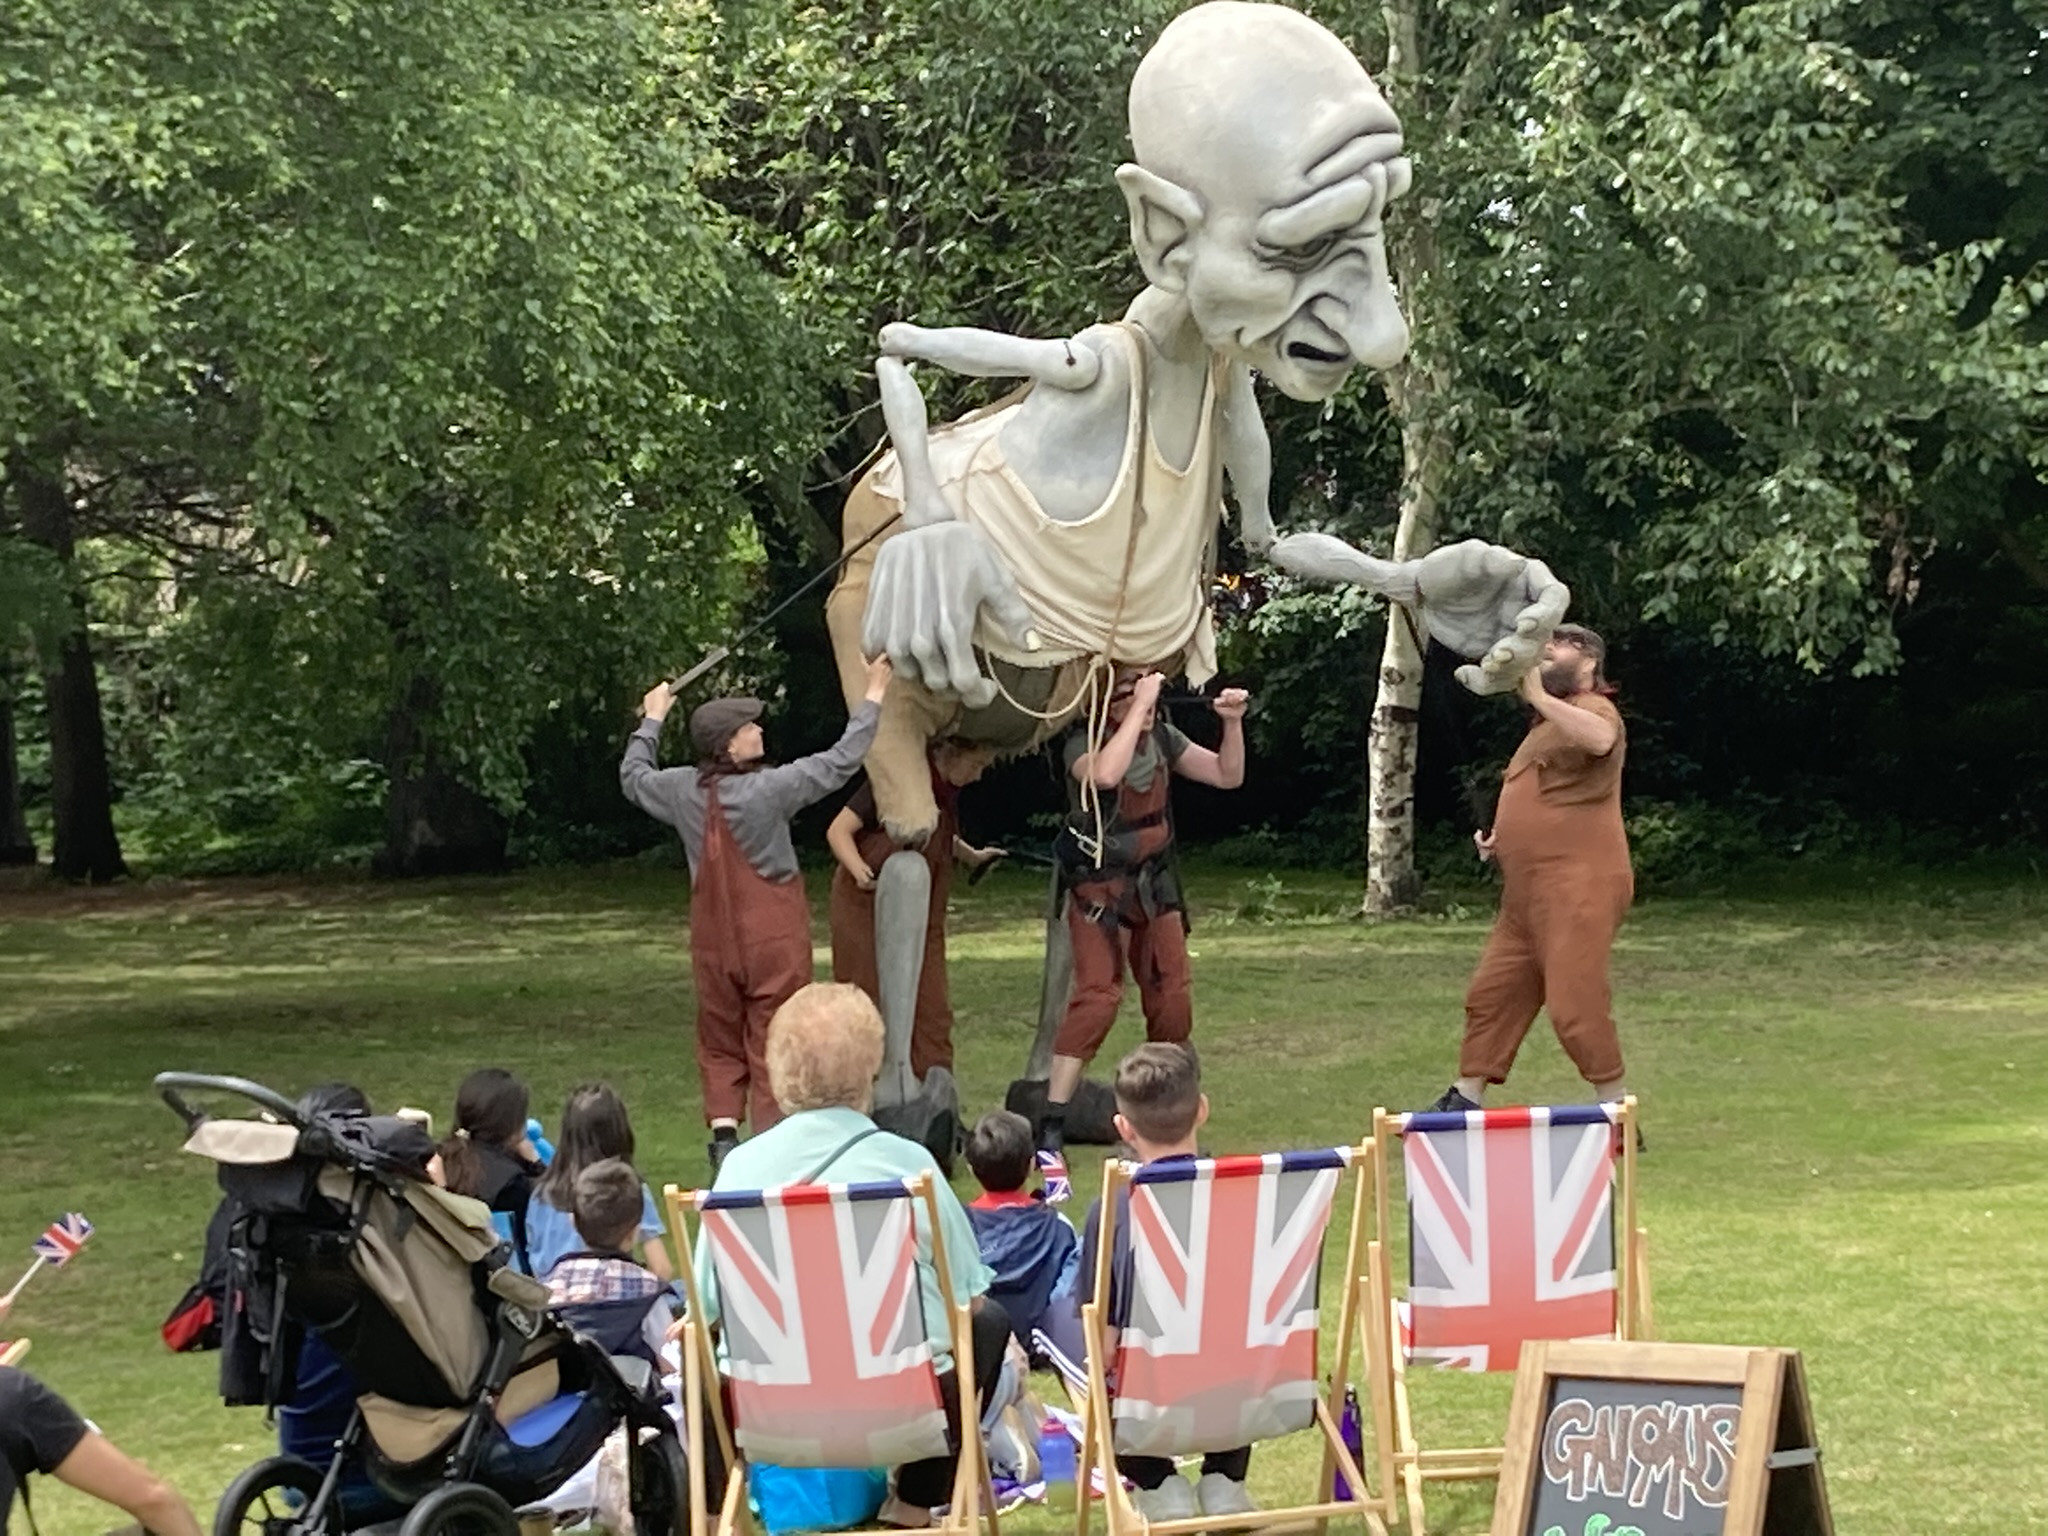 Large puppet being moved by three people with crowd watching